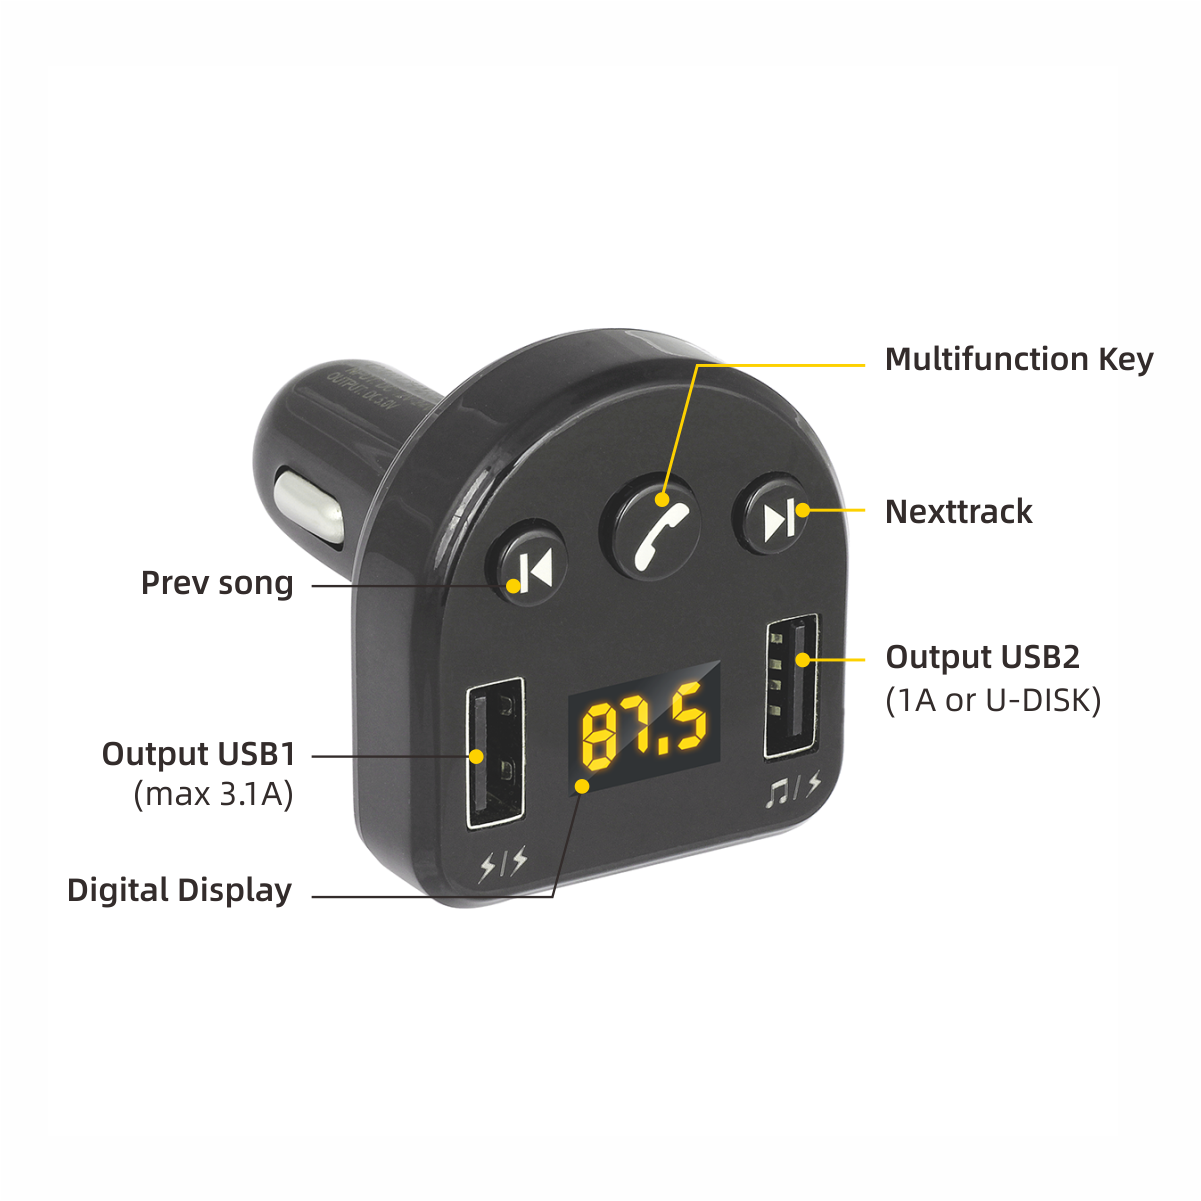 T852-Car-Charger-MP3-Player-Smart-Dual-USB-bluetooth-Receiver-Transmitter-Playback-Hands-free-FM-1567246